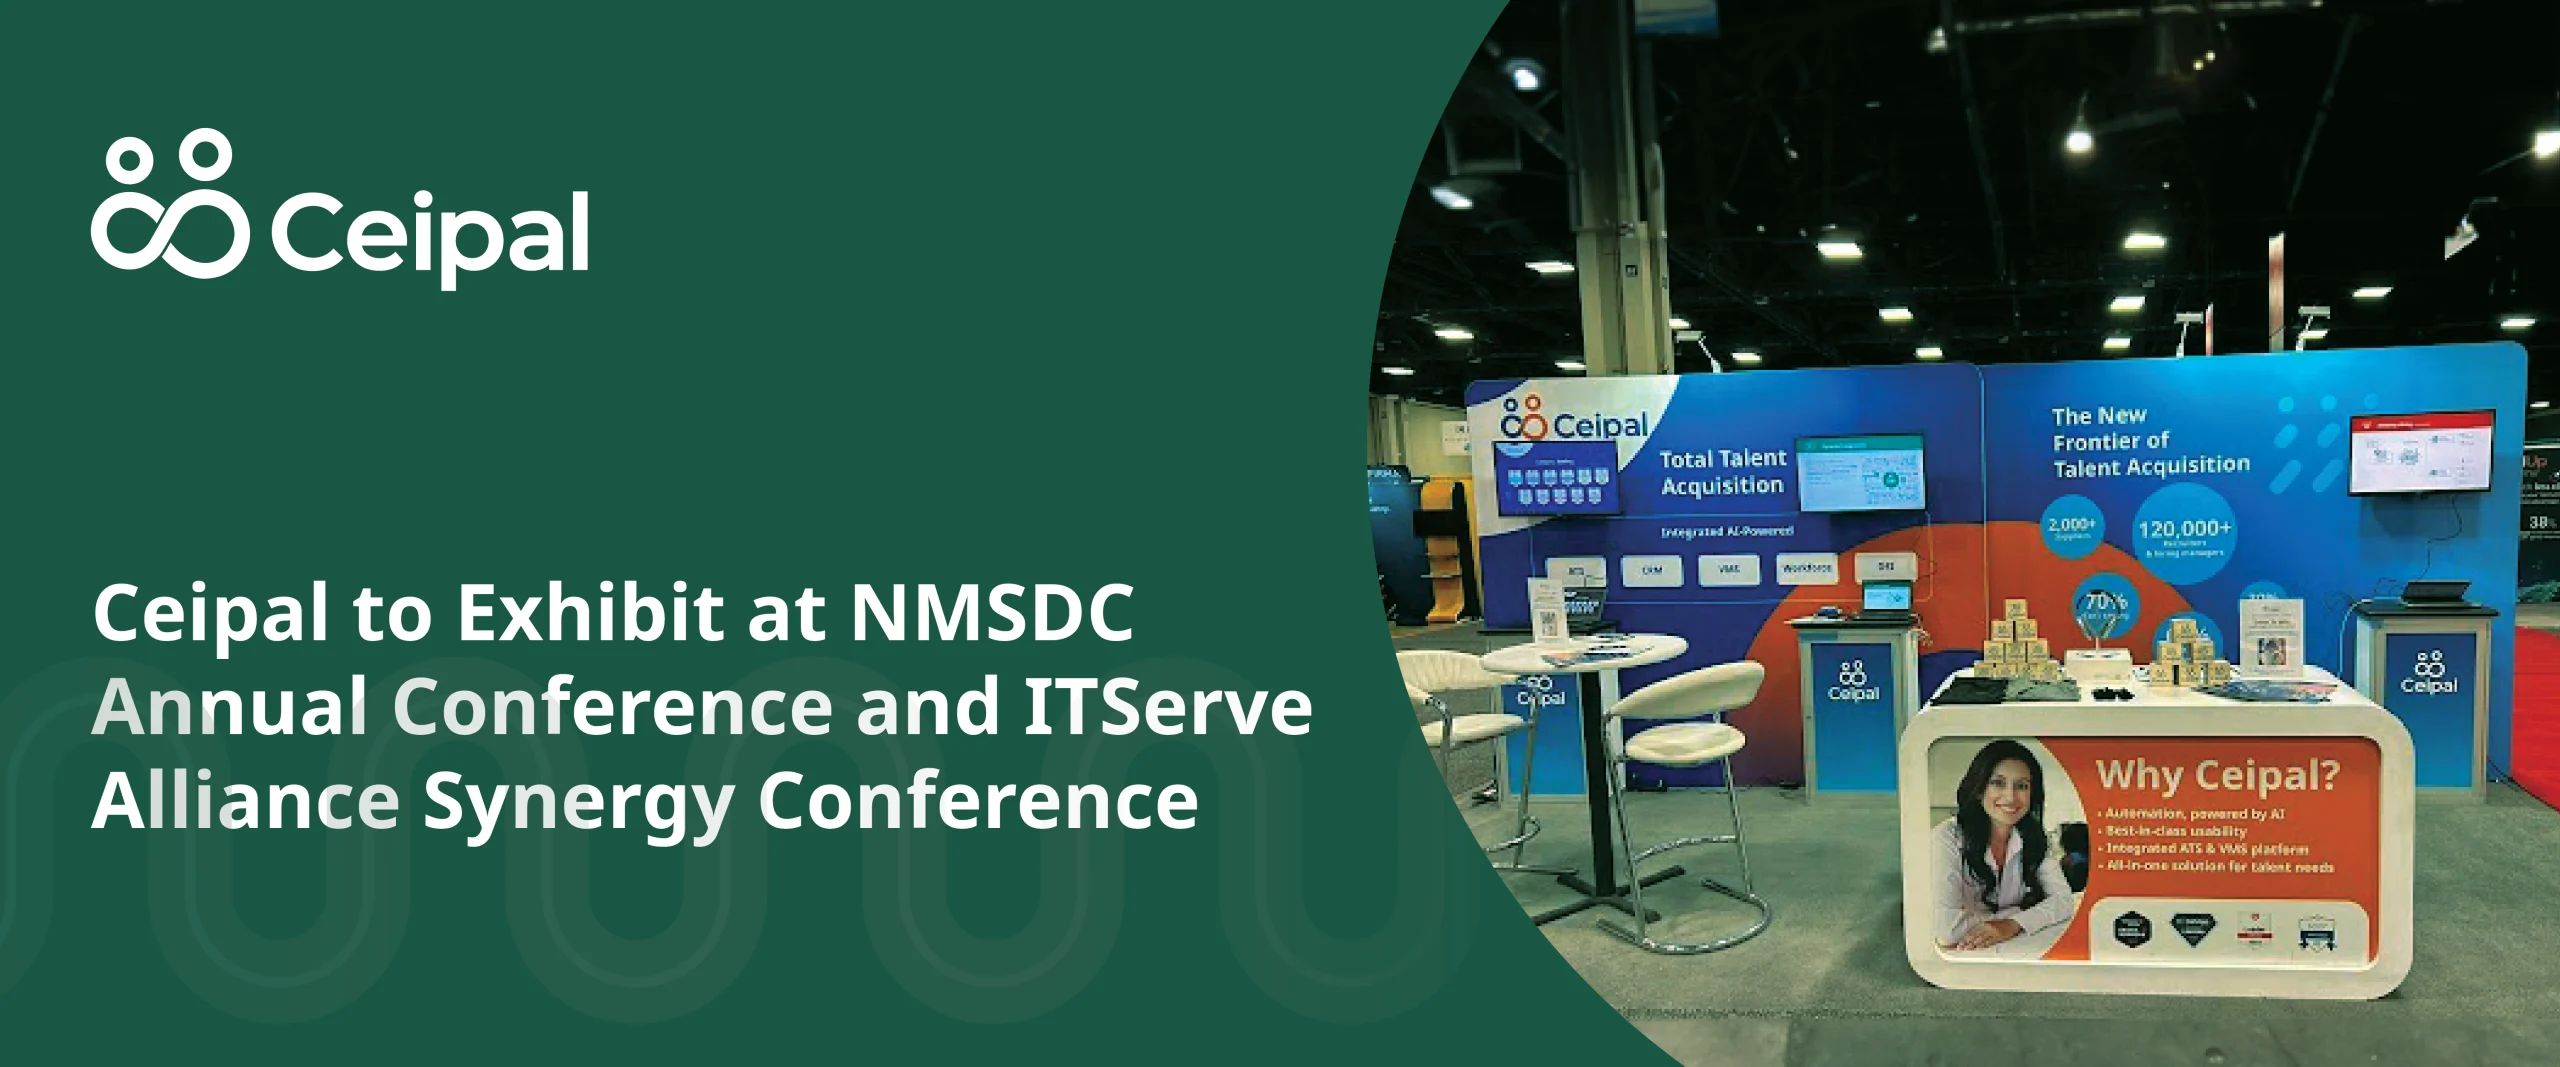 Ceipal To Exhibit Its AI-Powered Total Talent Acquisition and Automation Platform at NMSDC Annual Conference and ITServe Alliance Synergy Conference